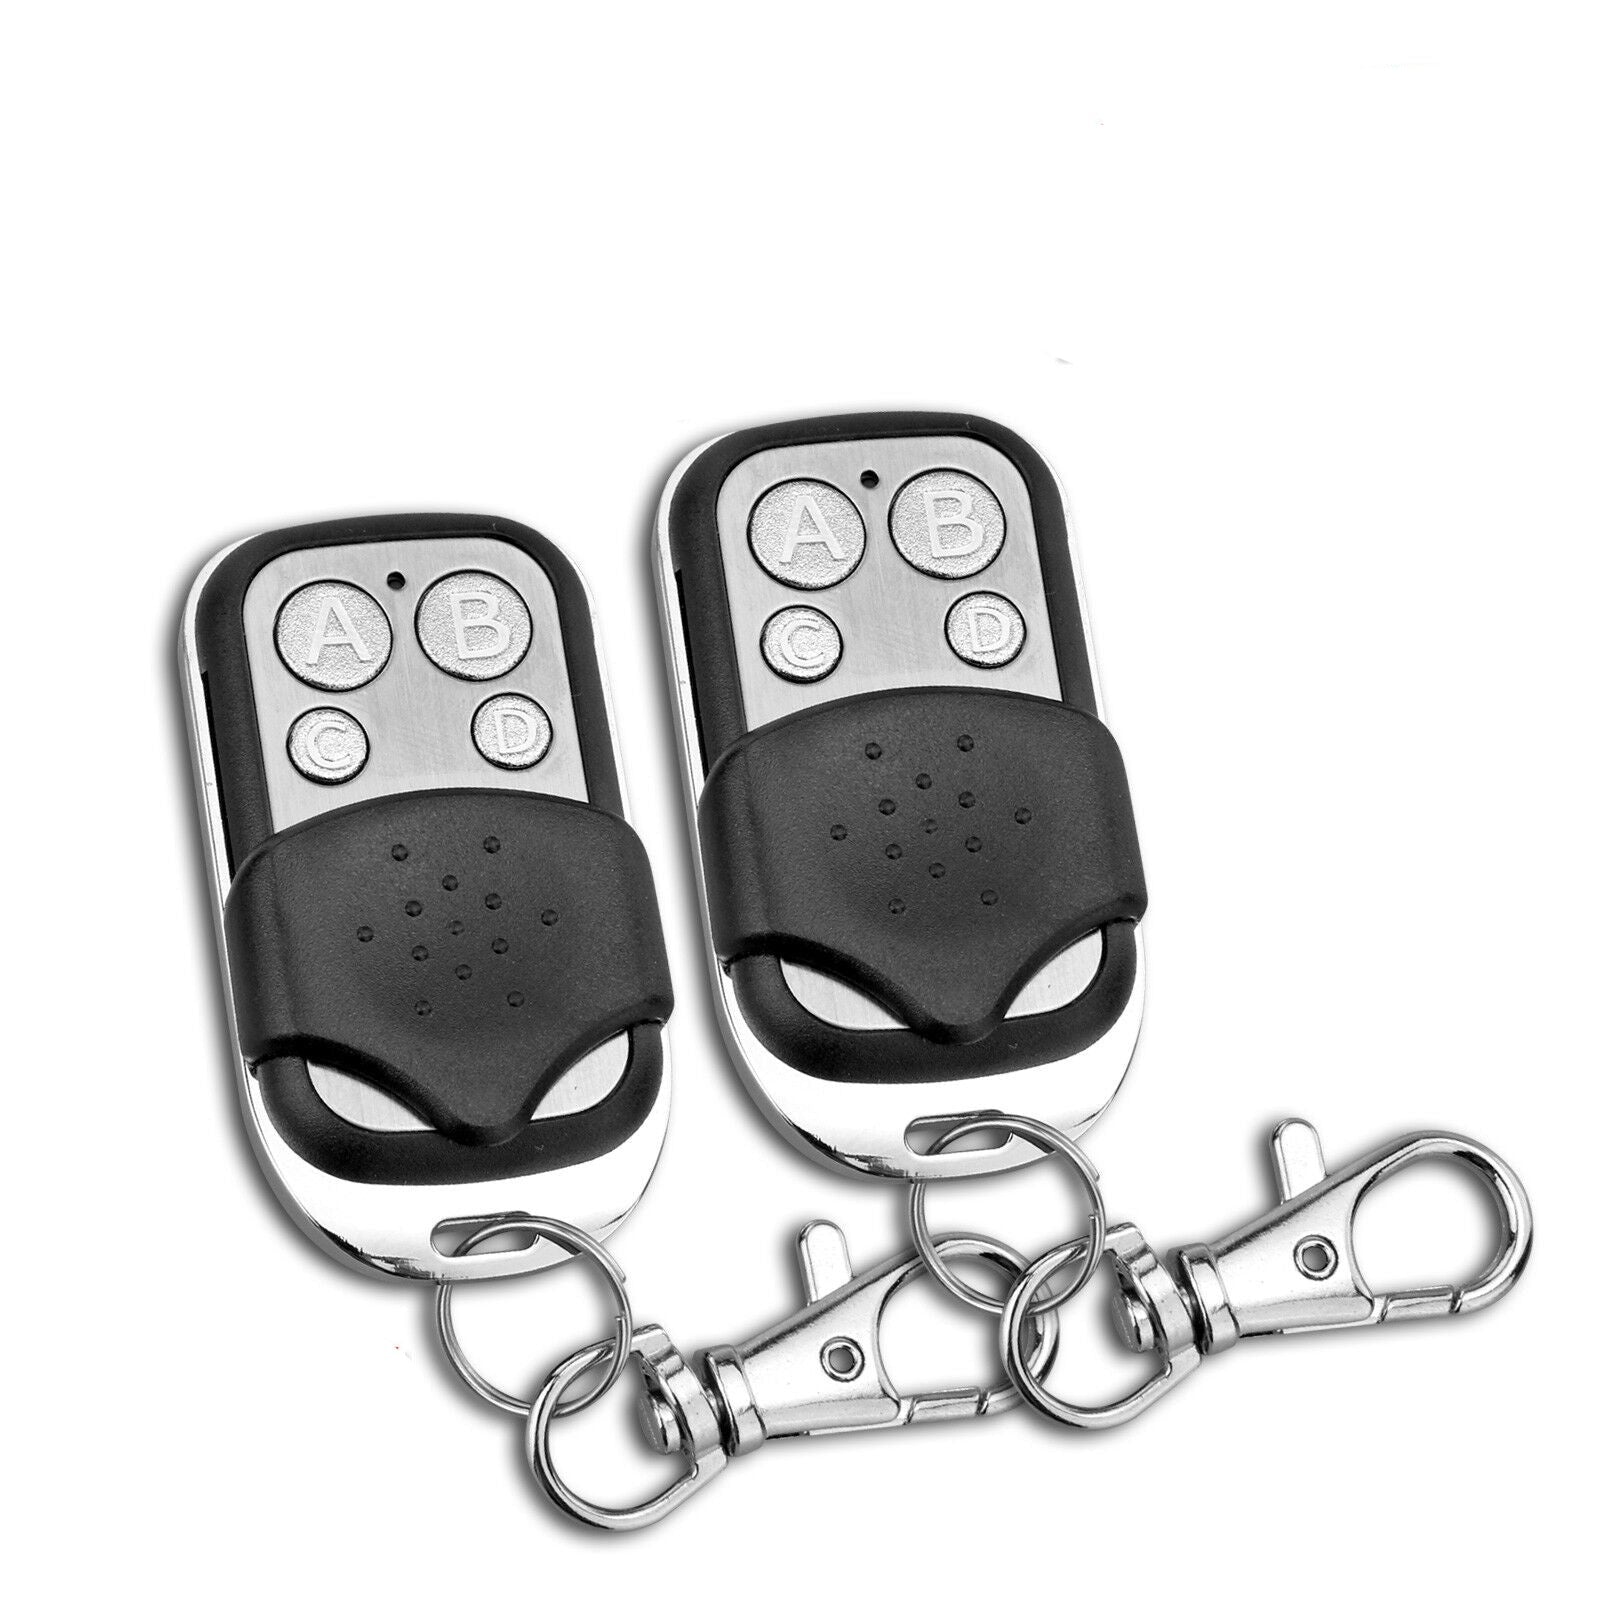 Universal 433MHz Cloning Remote Control Key Fob for Garage Doors, Gates, and Cars - Pack of 2